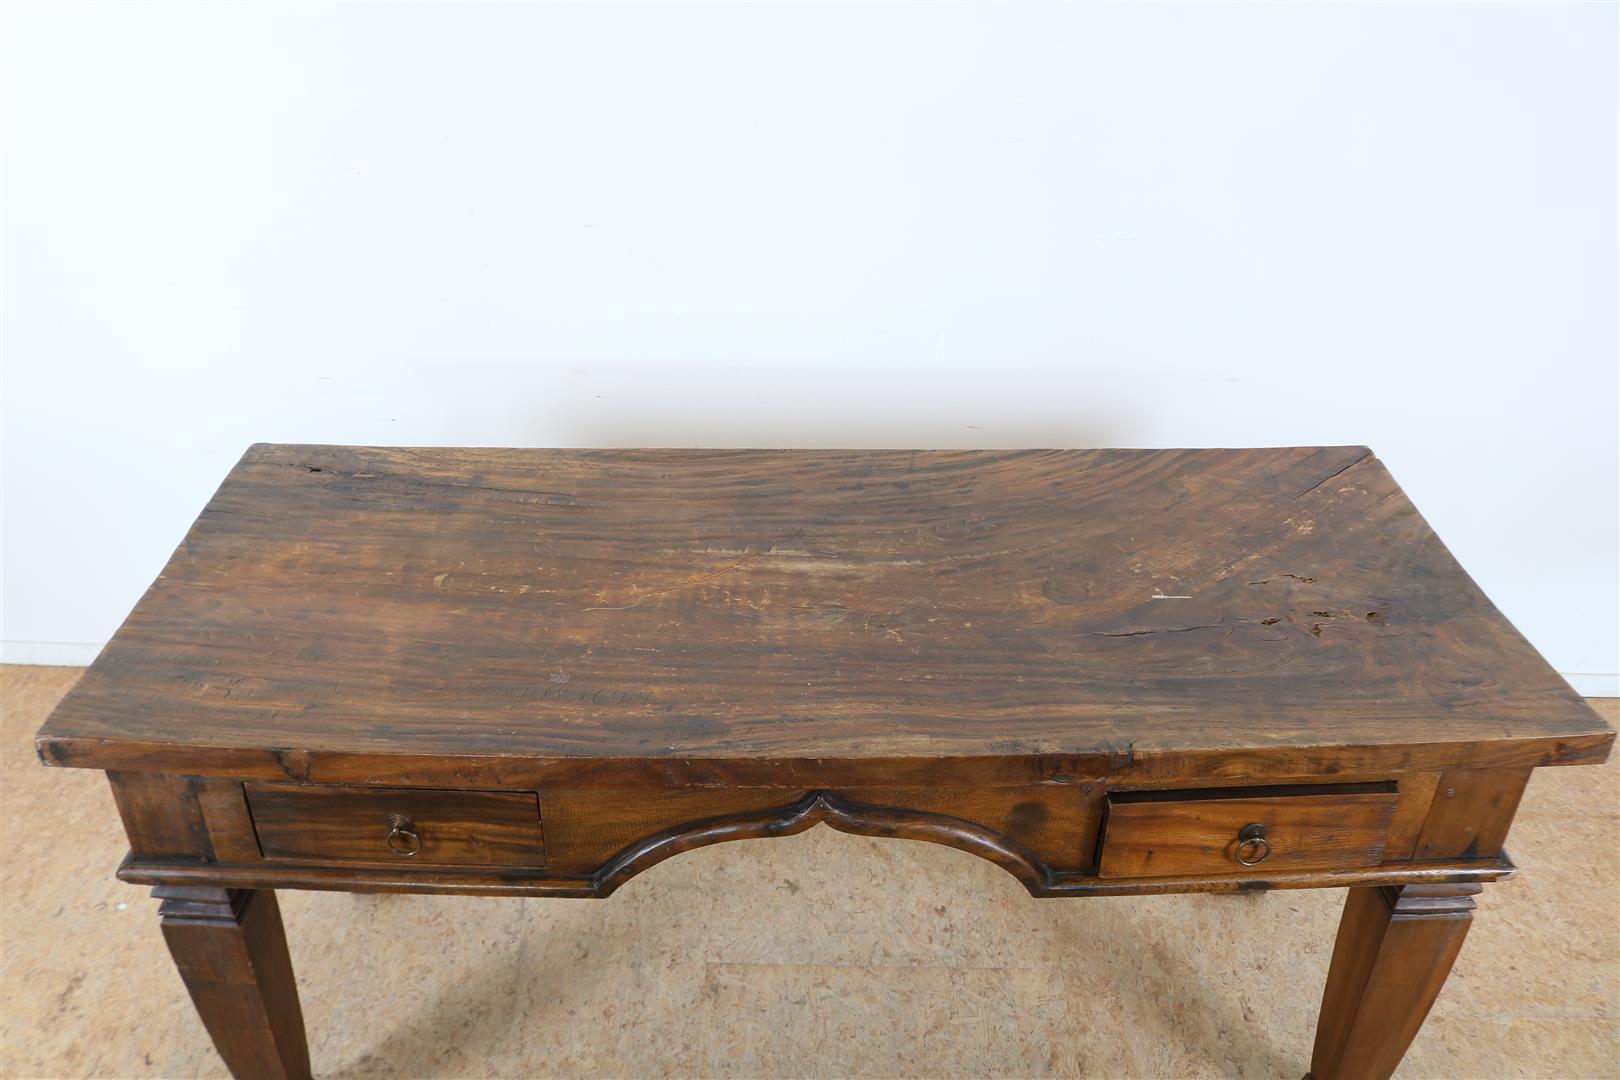 Teak table desk with 2 drawers on tapered legs, Indonesia, 83 x 175 x 73 cm. - Image 4 of 5